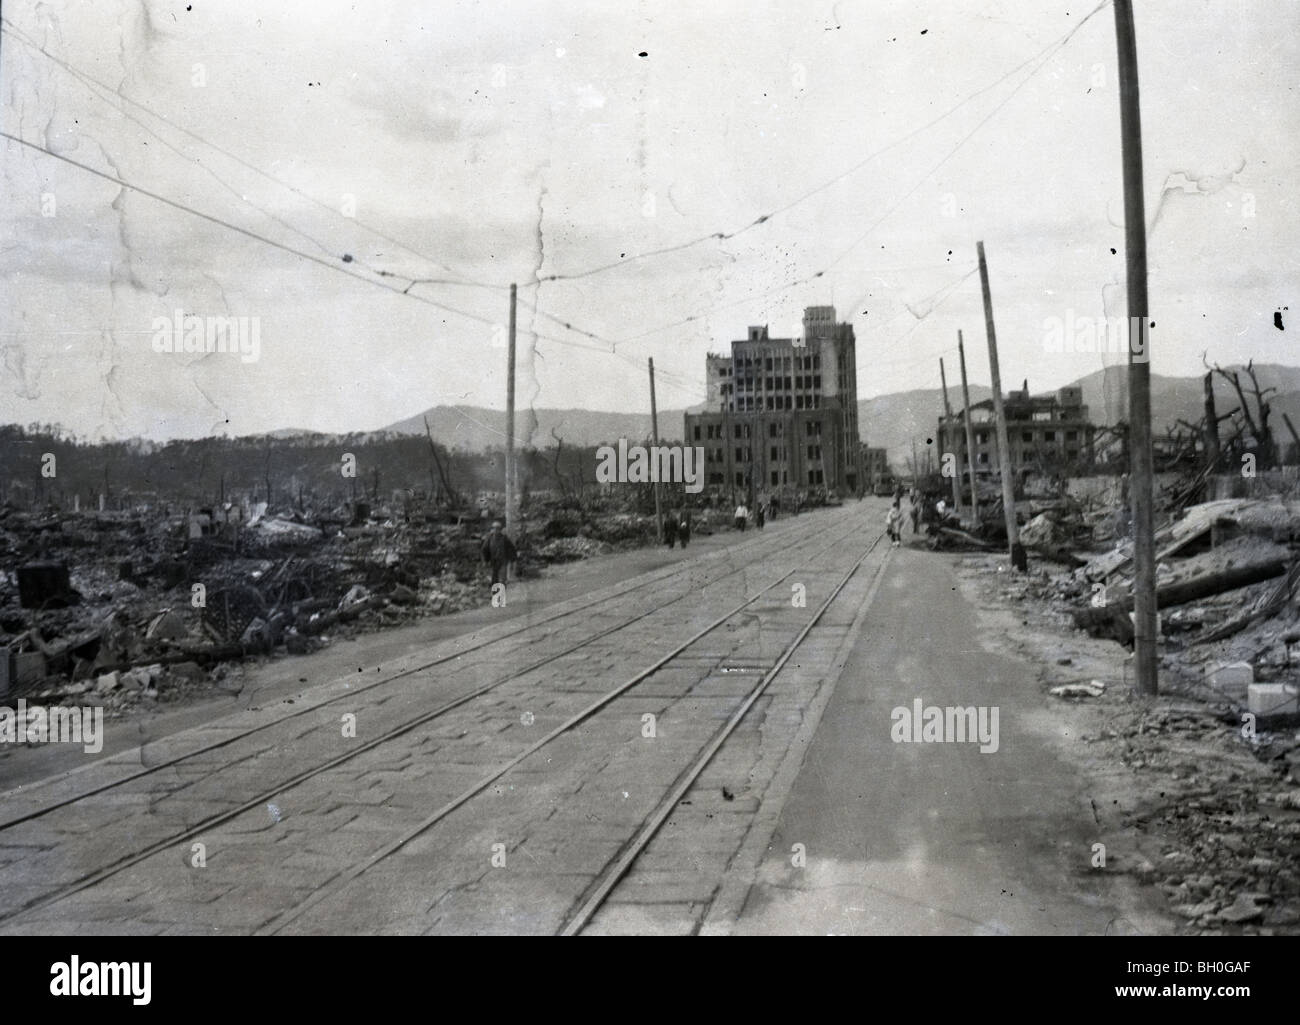 Trolley tracks. Scene from Hiroshima, Japan in ruins shortly after the Atomic Bomb was dropped Stock Photo